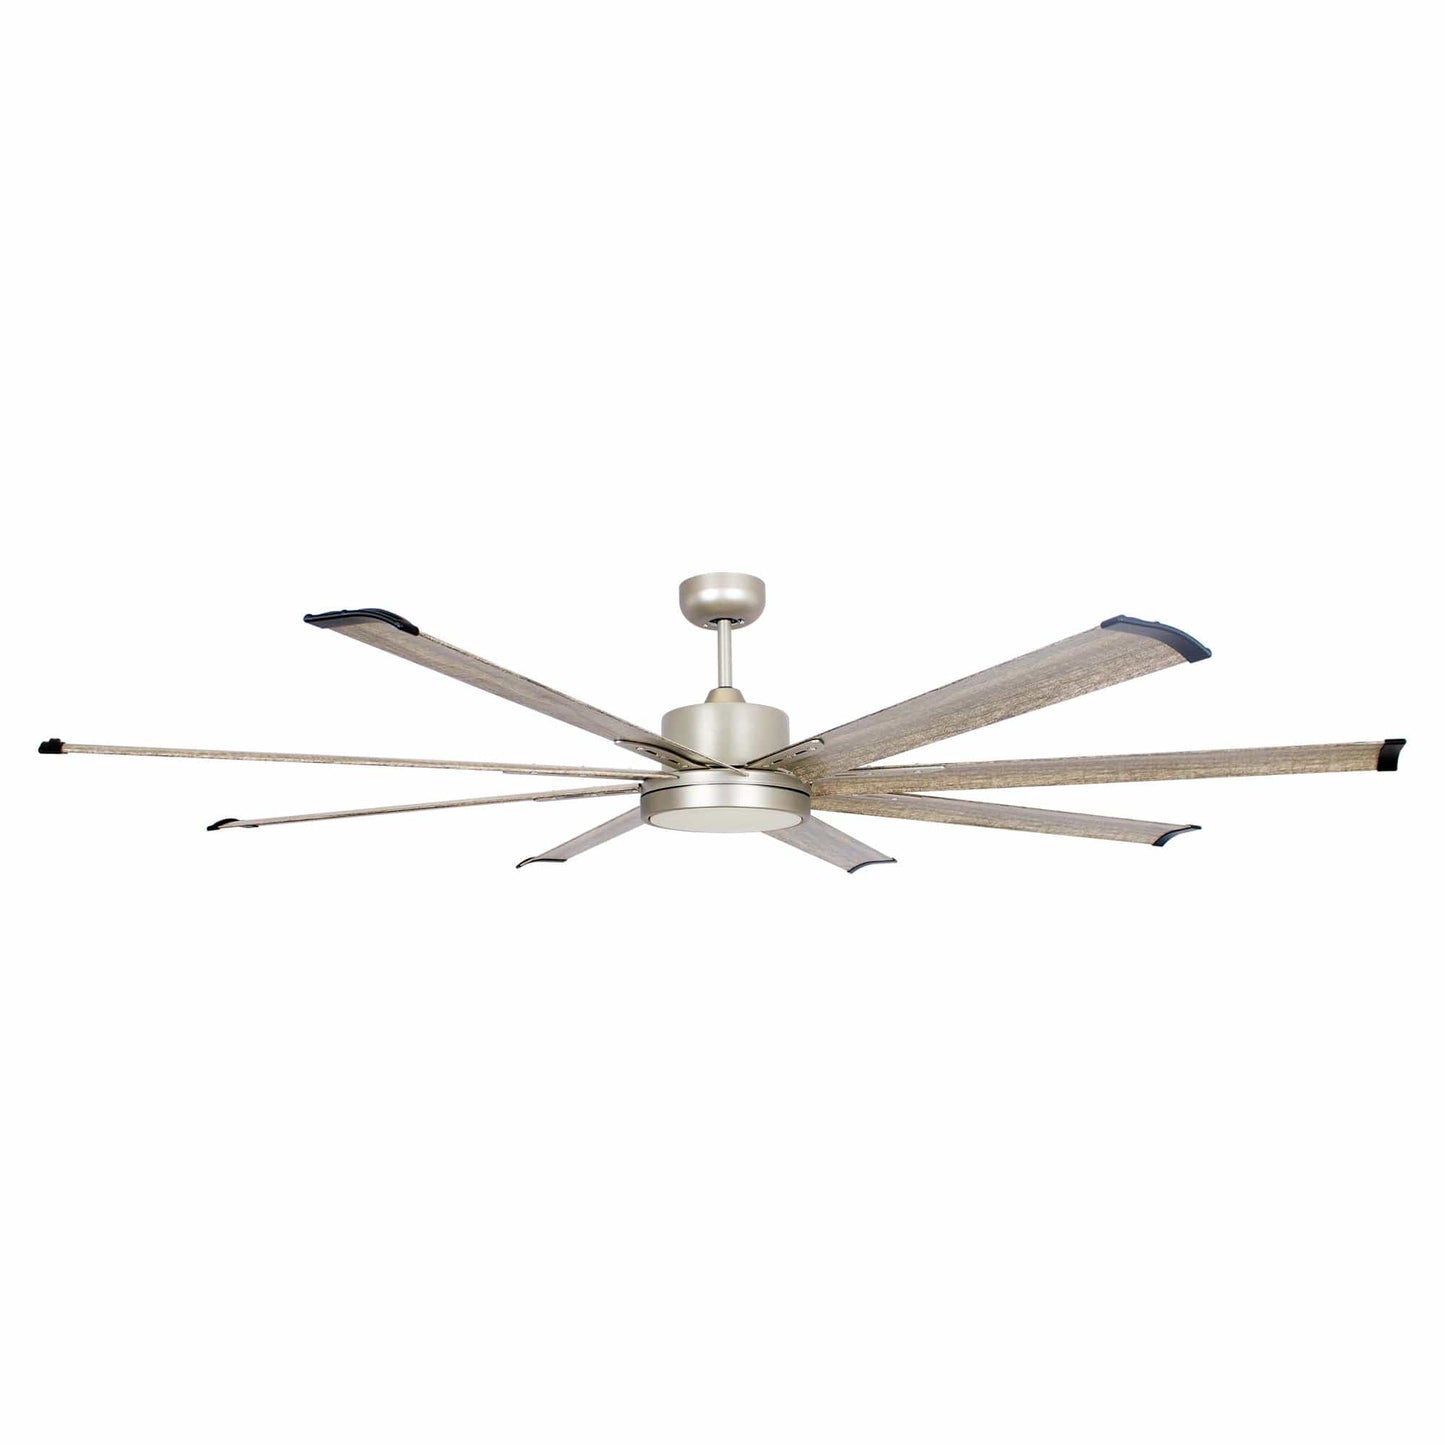 Parrot Uncle 72" Bankston Modern Downrod Mount Ceiling Fan with Lighting and Remote Control